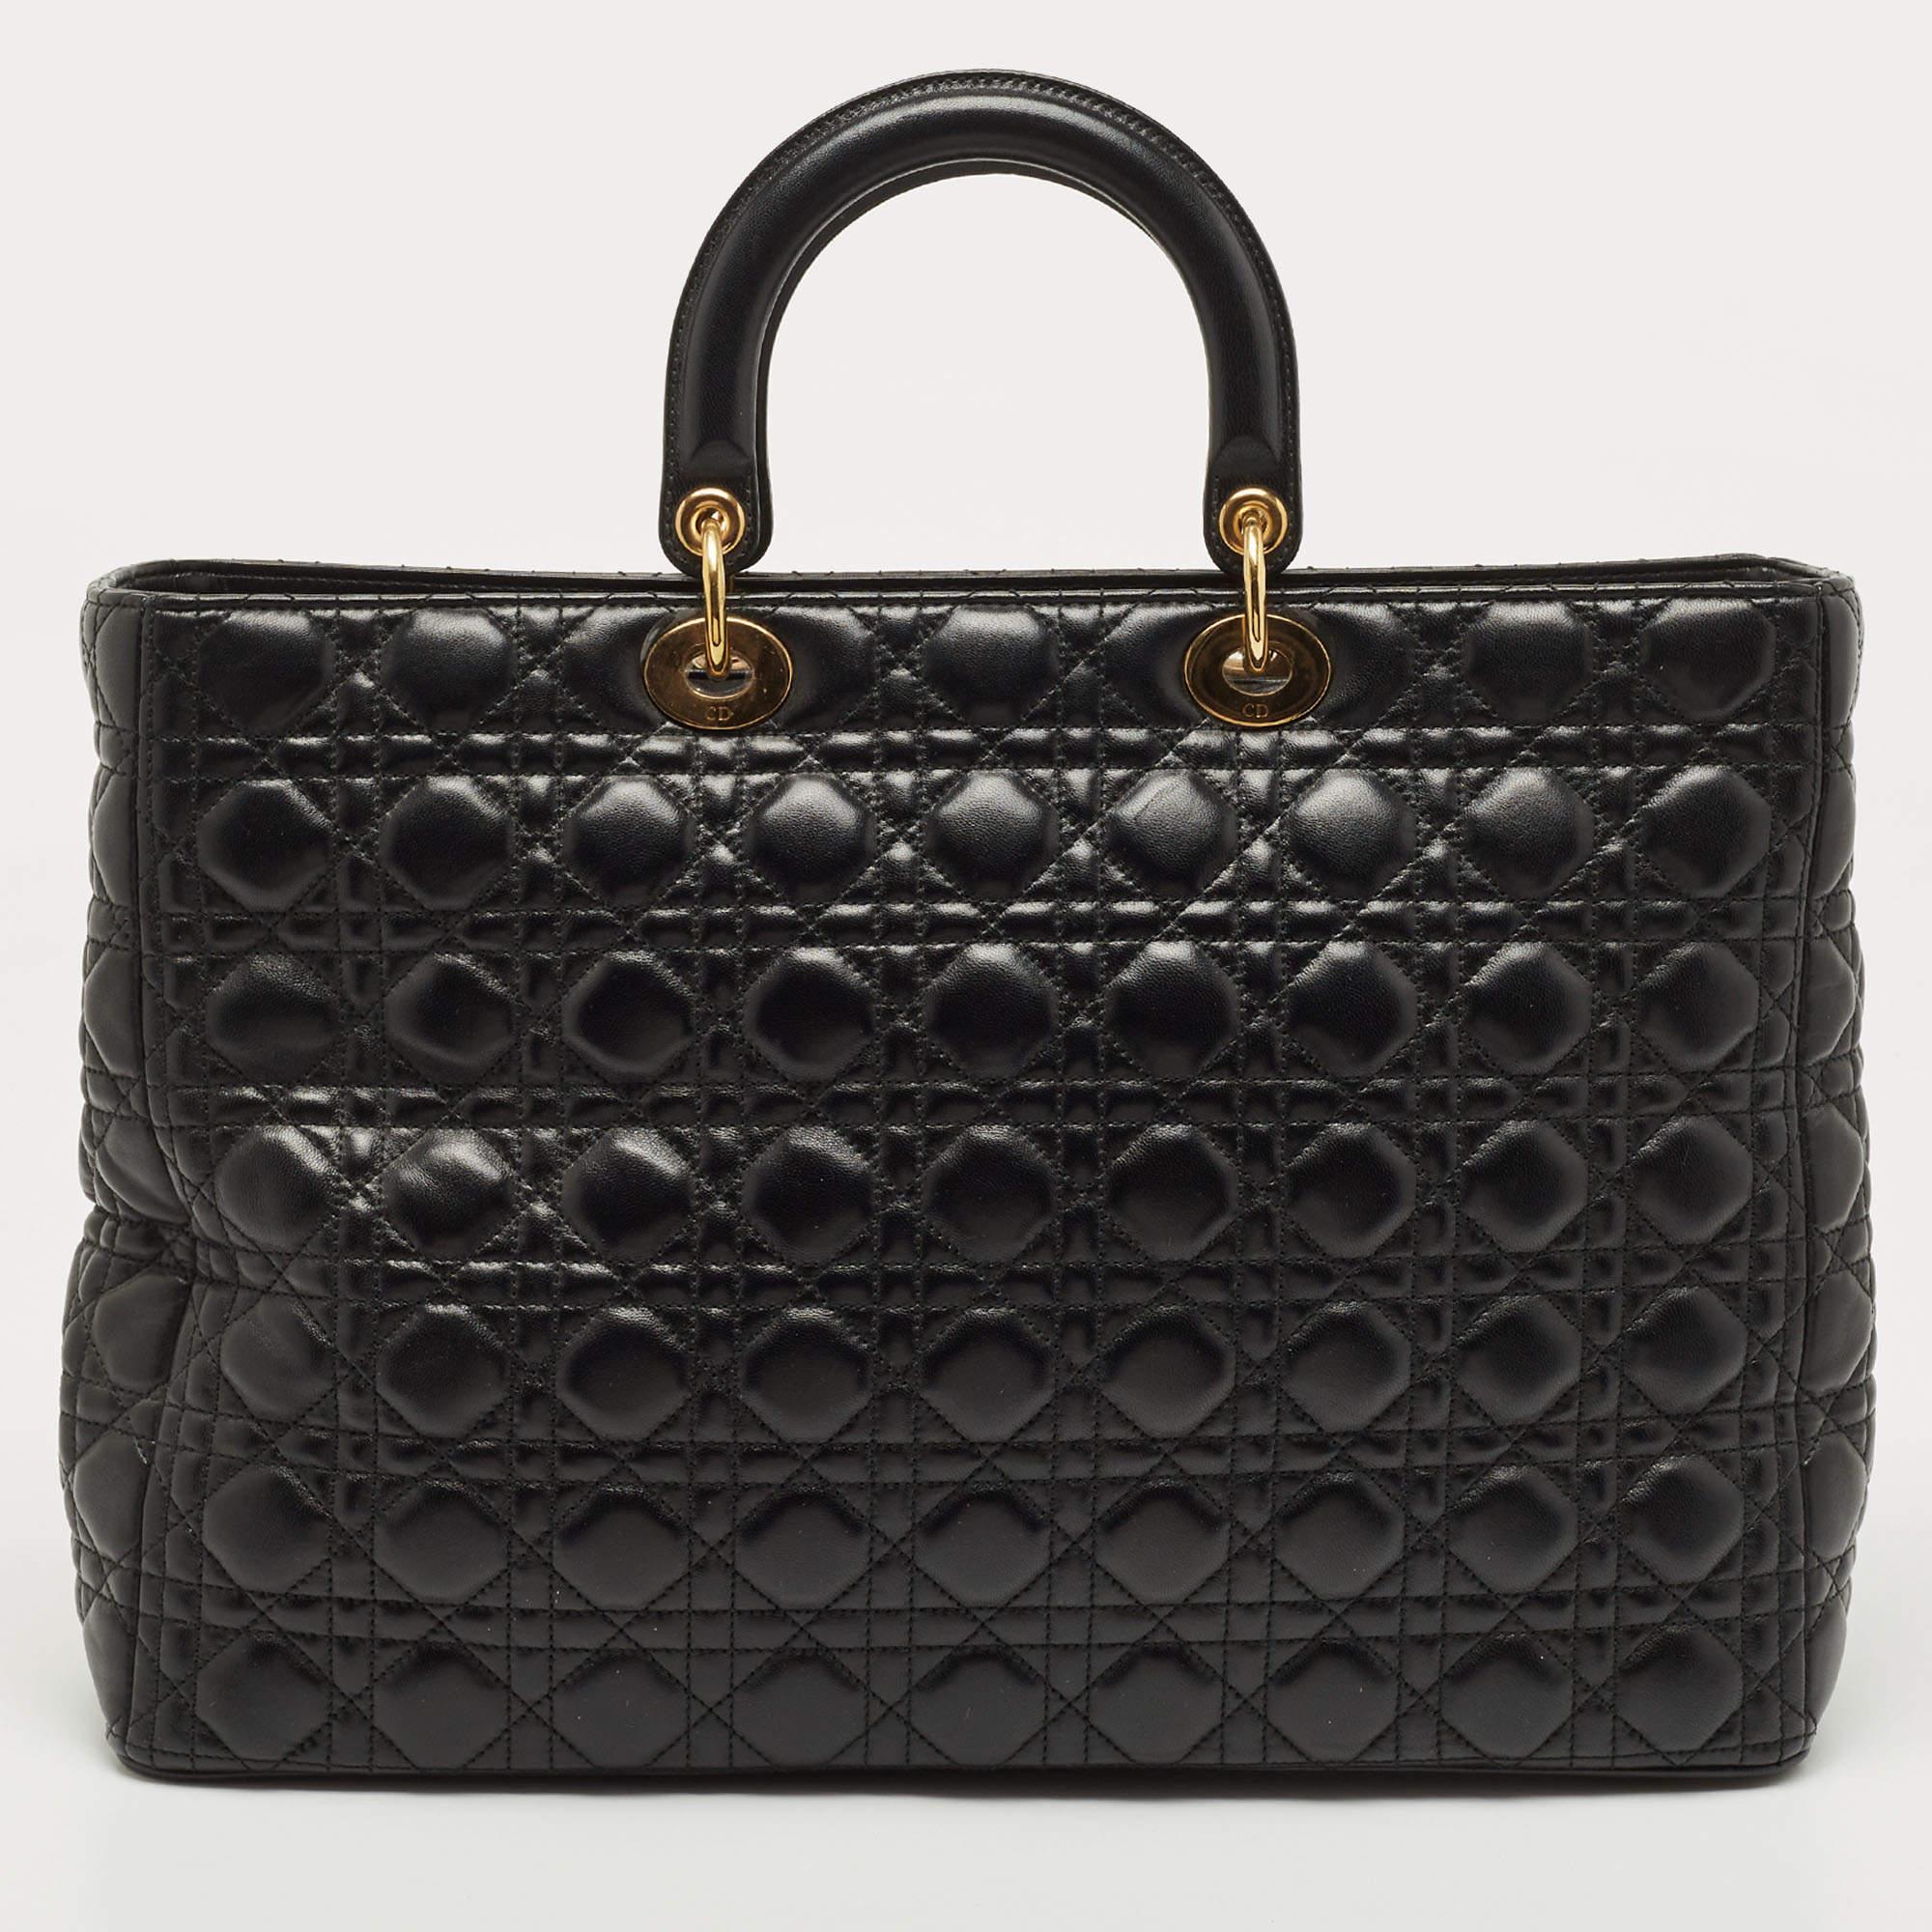 A timeless status and significant design define this impeccable Lady Dior tote. An iconic creation, this tote brings eternal poise, gracefulness, and elegance to your appearance. This version comes crafted in black Cannage leather, with gold-toned